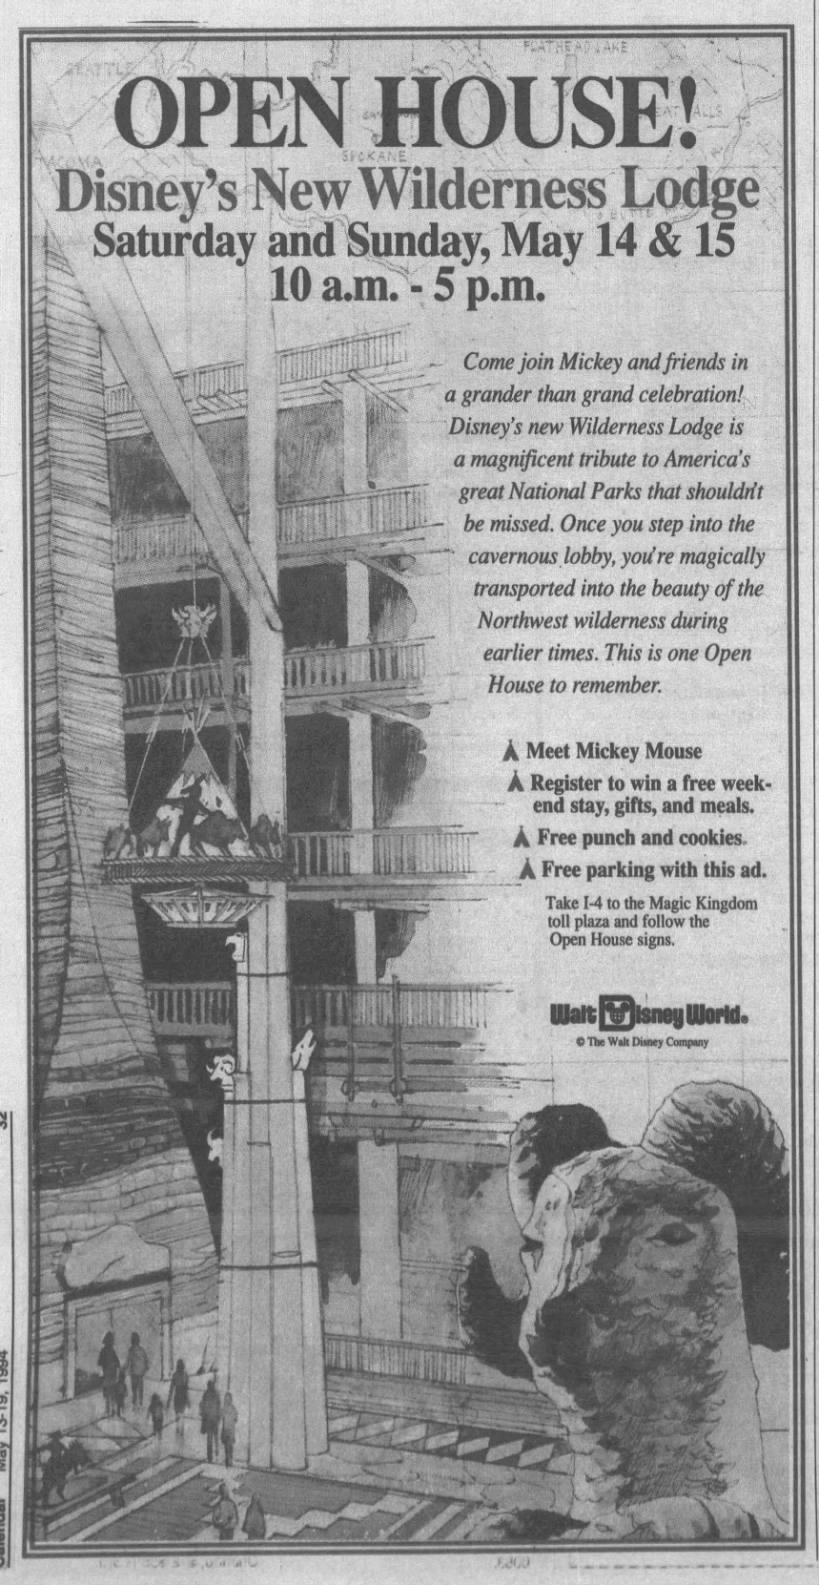 "Open house" ad for Wilderness Lodge, The Orlando Sentinel, 13 May 1994.